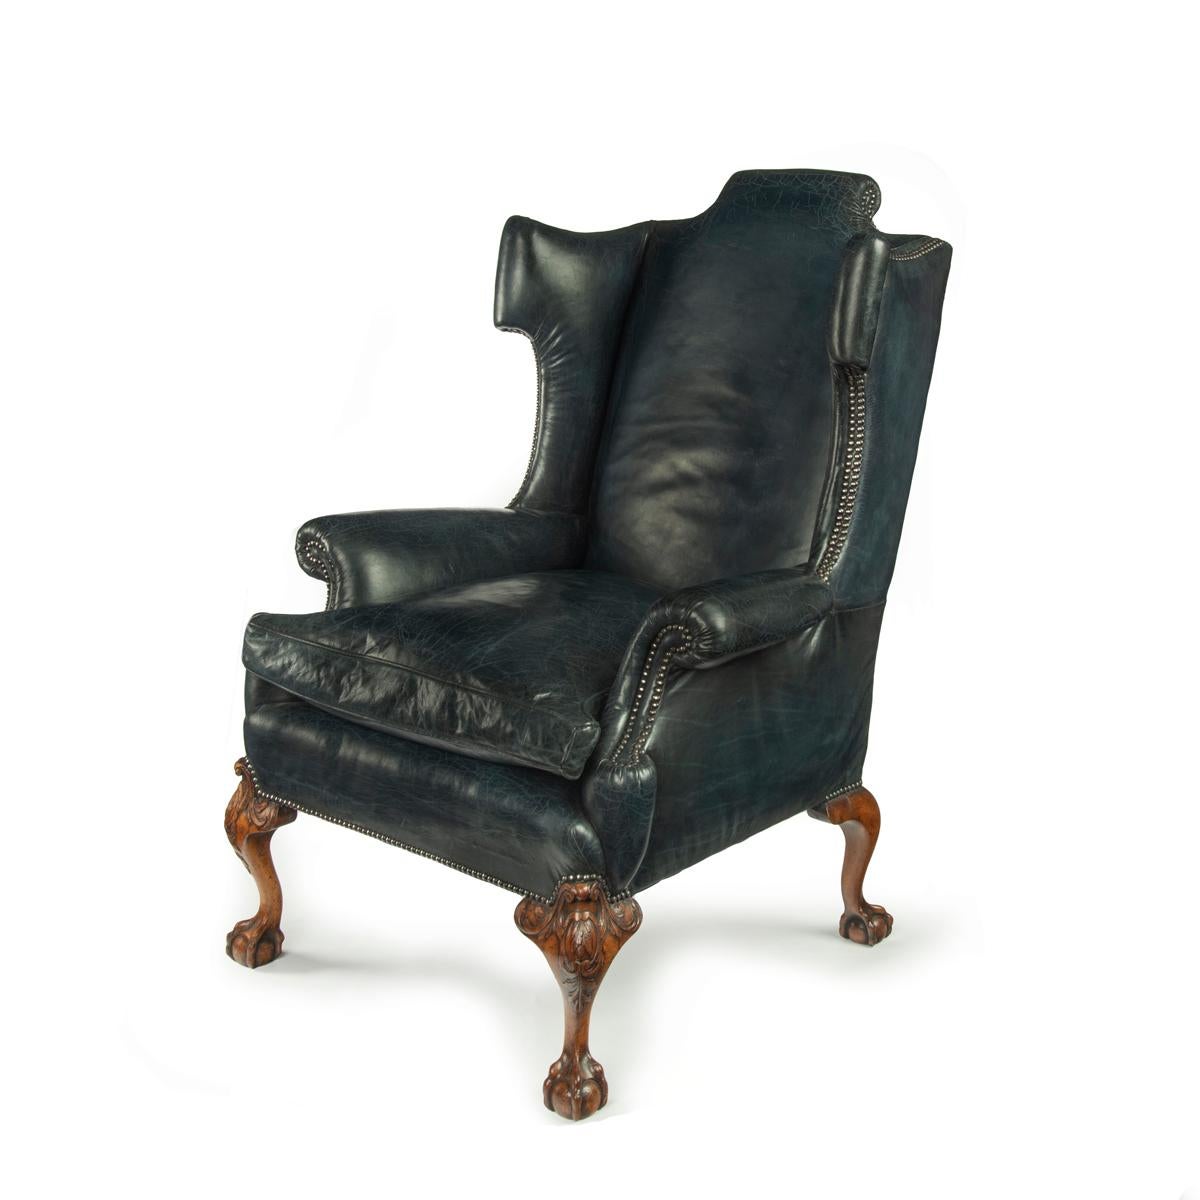 A generous late Victorian walnut wing arm chair, in the Georgian style, with scrolling wings, shaped top rail, carved on the front knees with confronting C-scrolls and foliage, all four legs with claw and ball feet, reupholstered in distressed blue